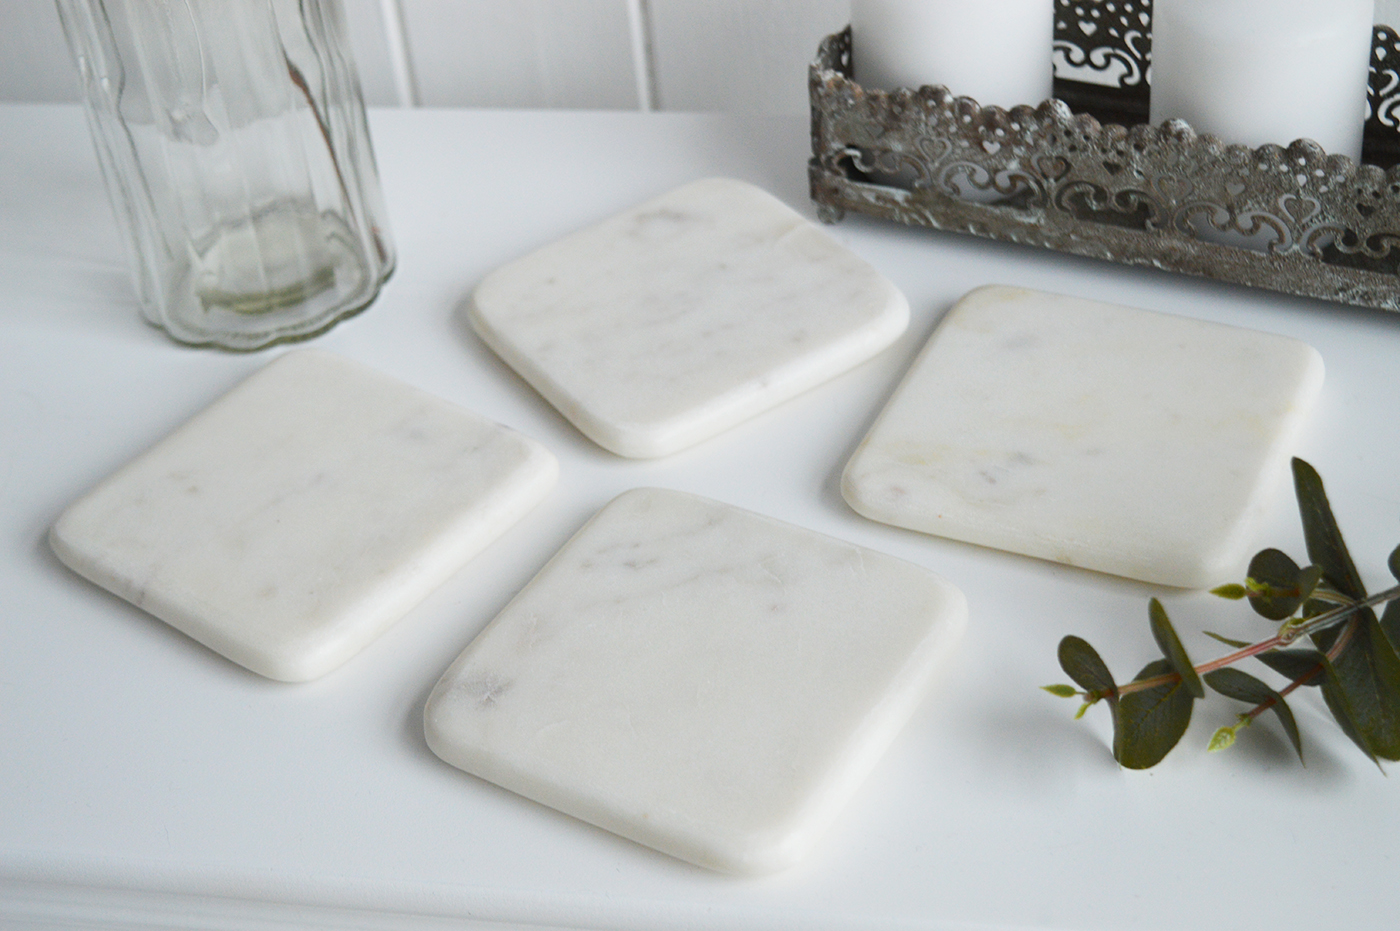 New England style home interiors from The White Lighthouse Furniture - White Marble Coaster